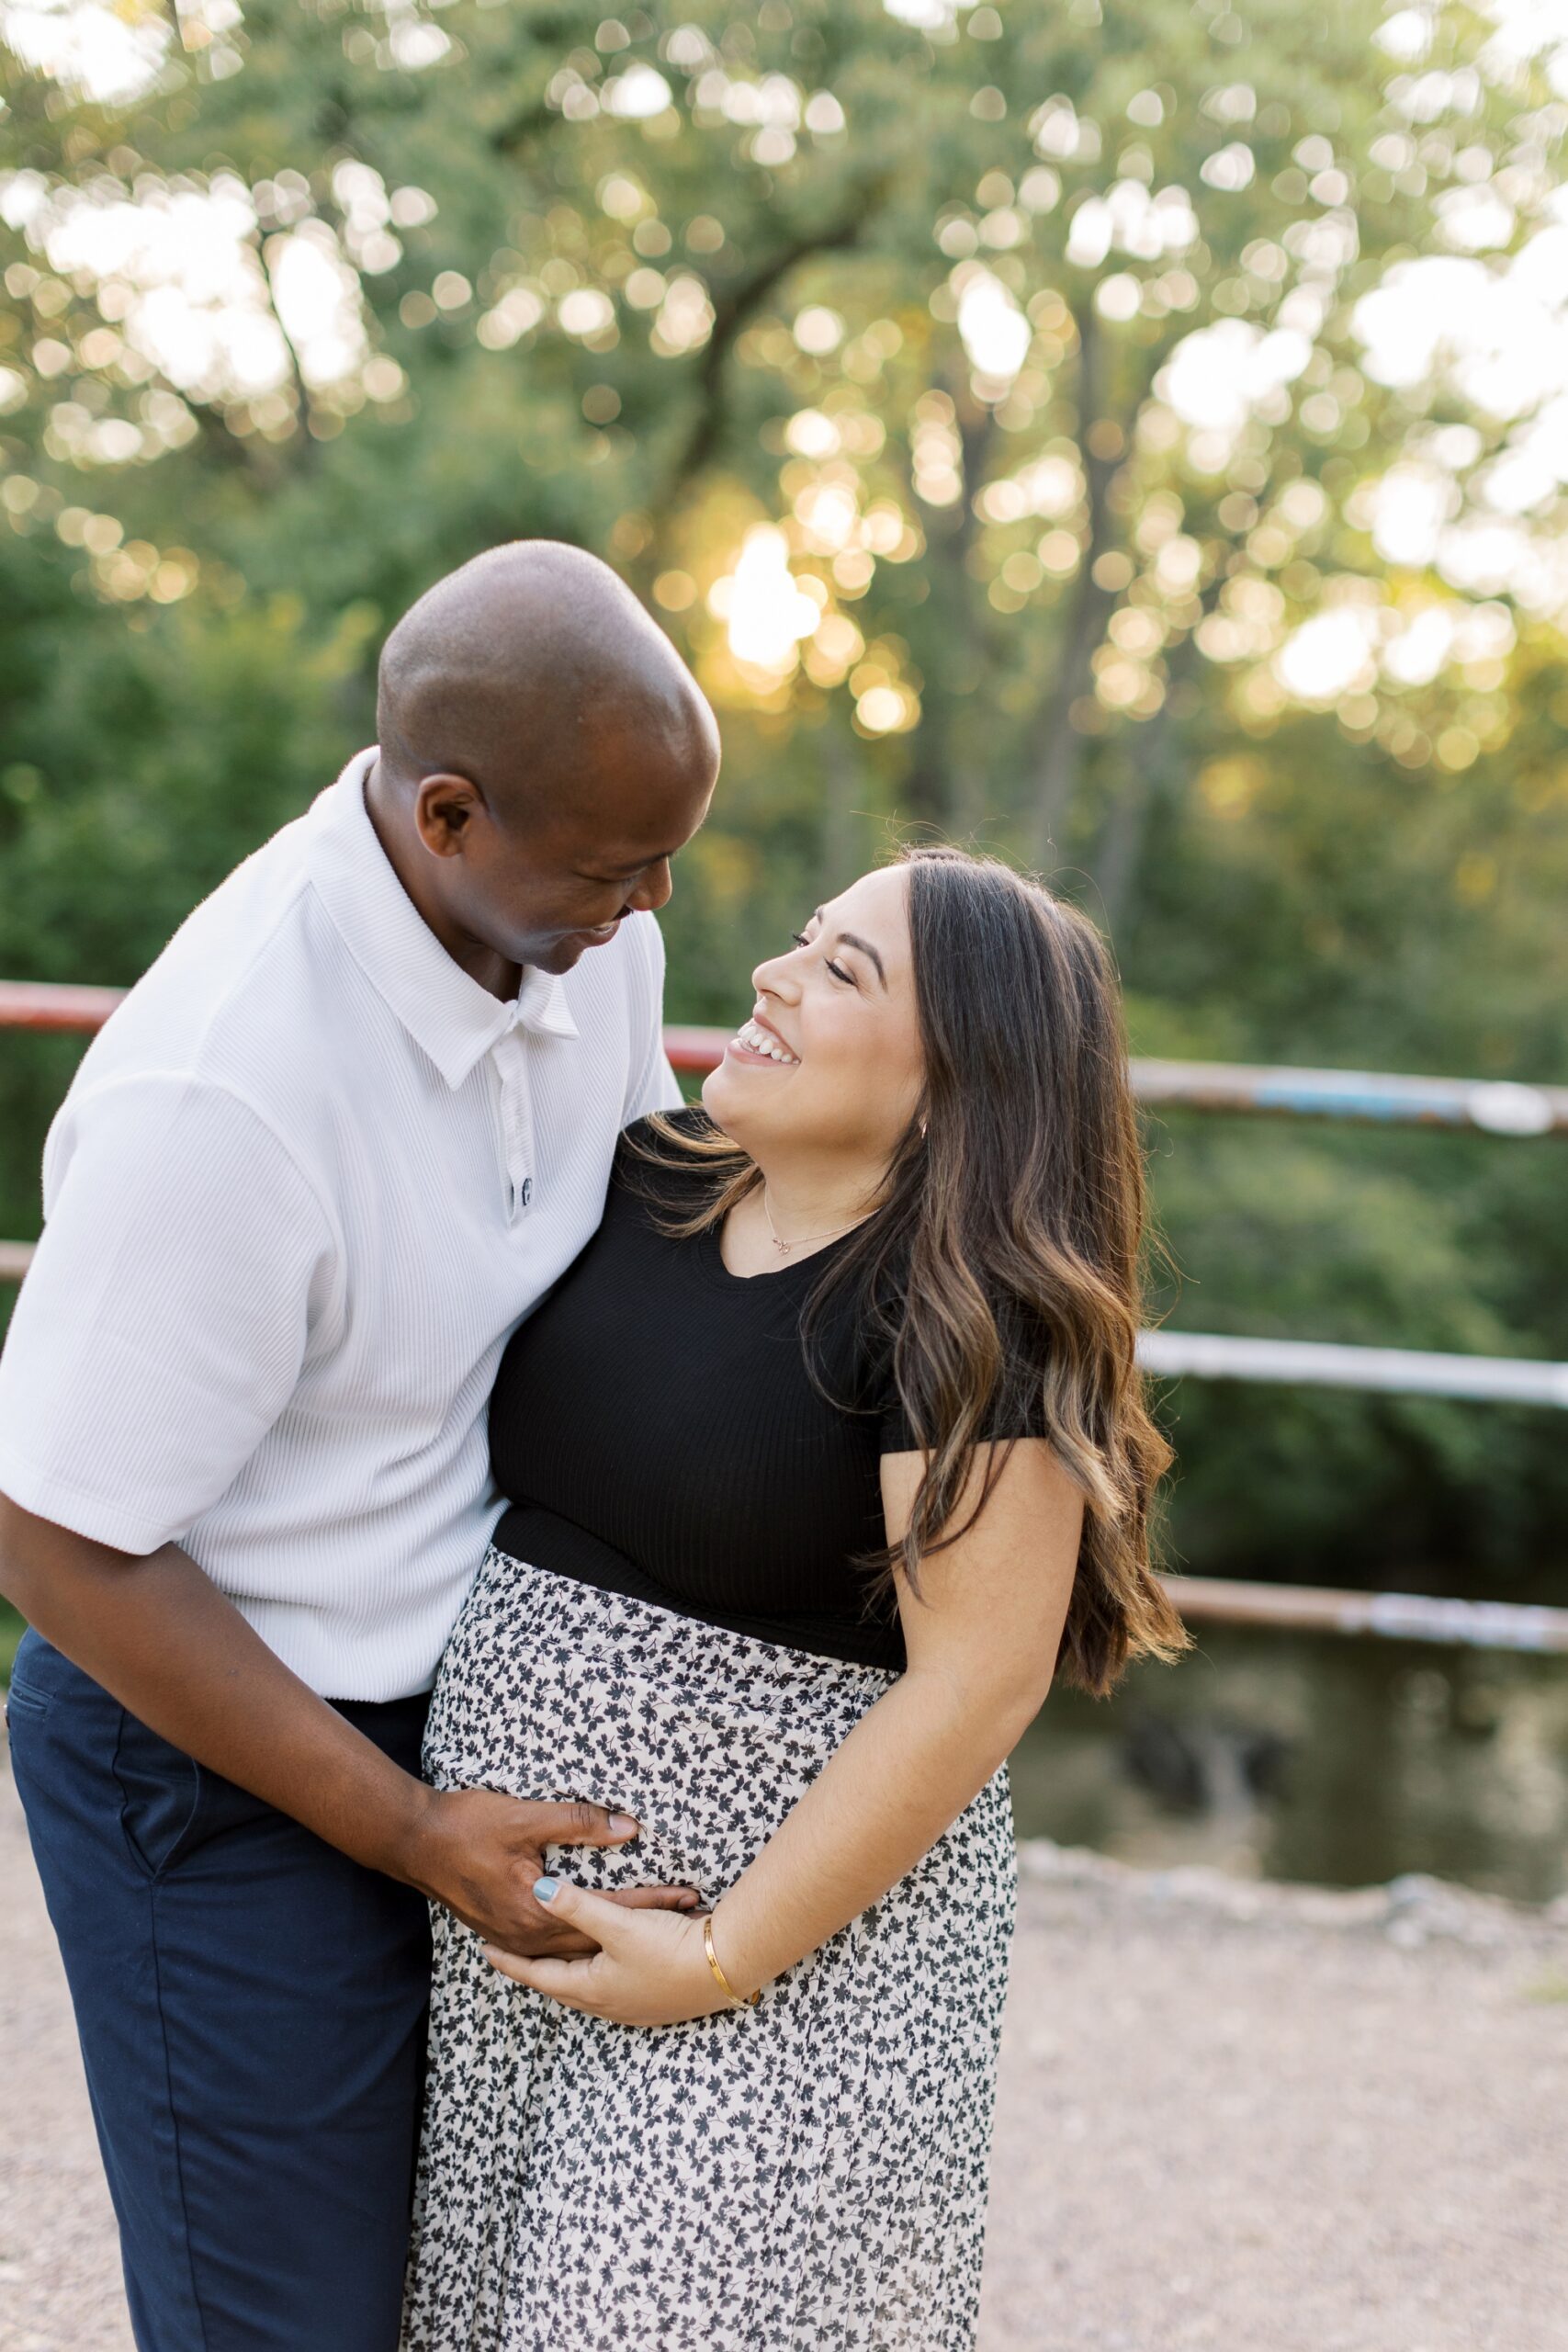 Man and woman smile during Chicago outdoor summer maternity photo session